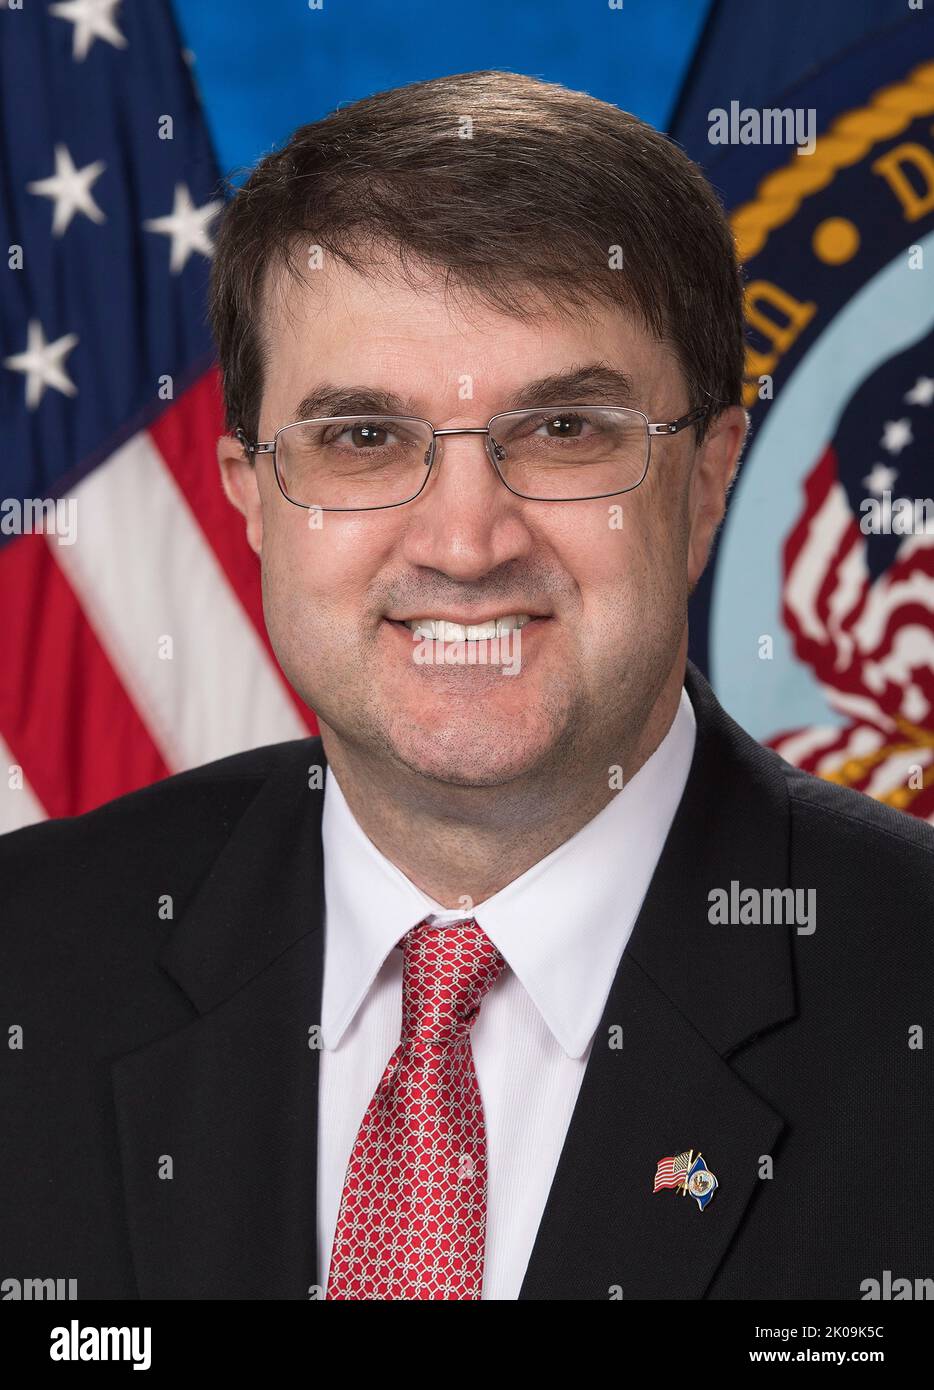 Robert Leon Wilkie Jr. (born August 2, 1962) is an American lawyer and government official who served as the United States Secretary of Veterans Affairs from 2018 to 2021, during the Trump administration. Stock Photo